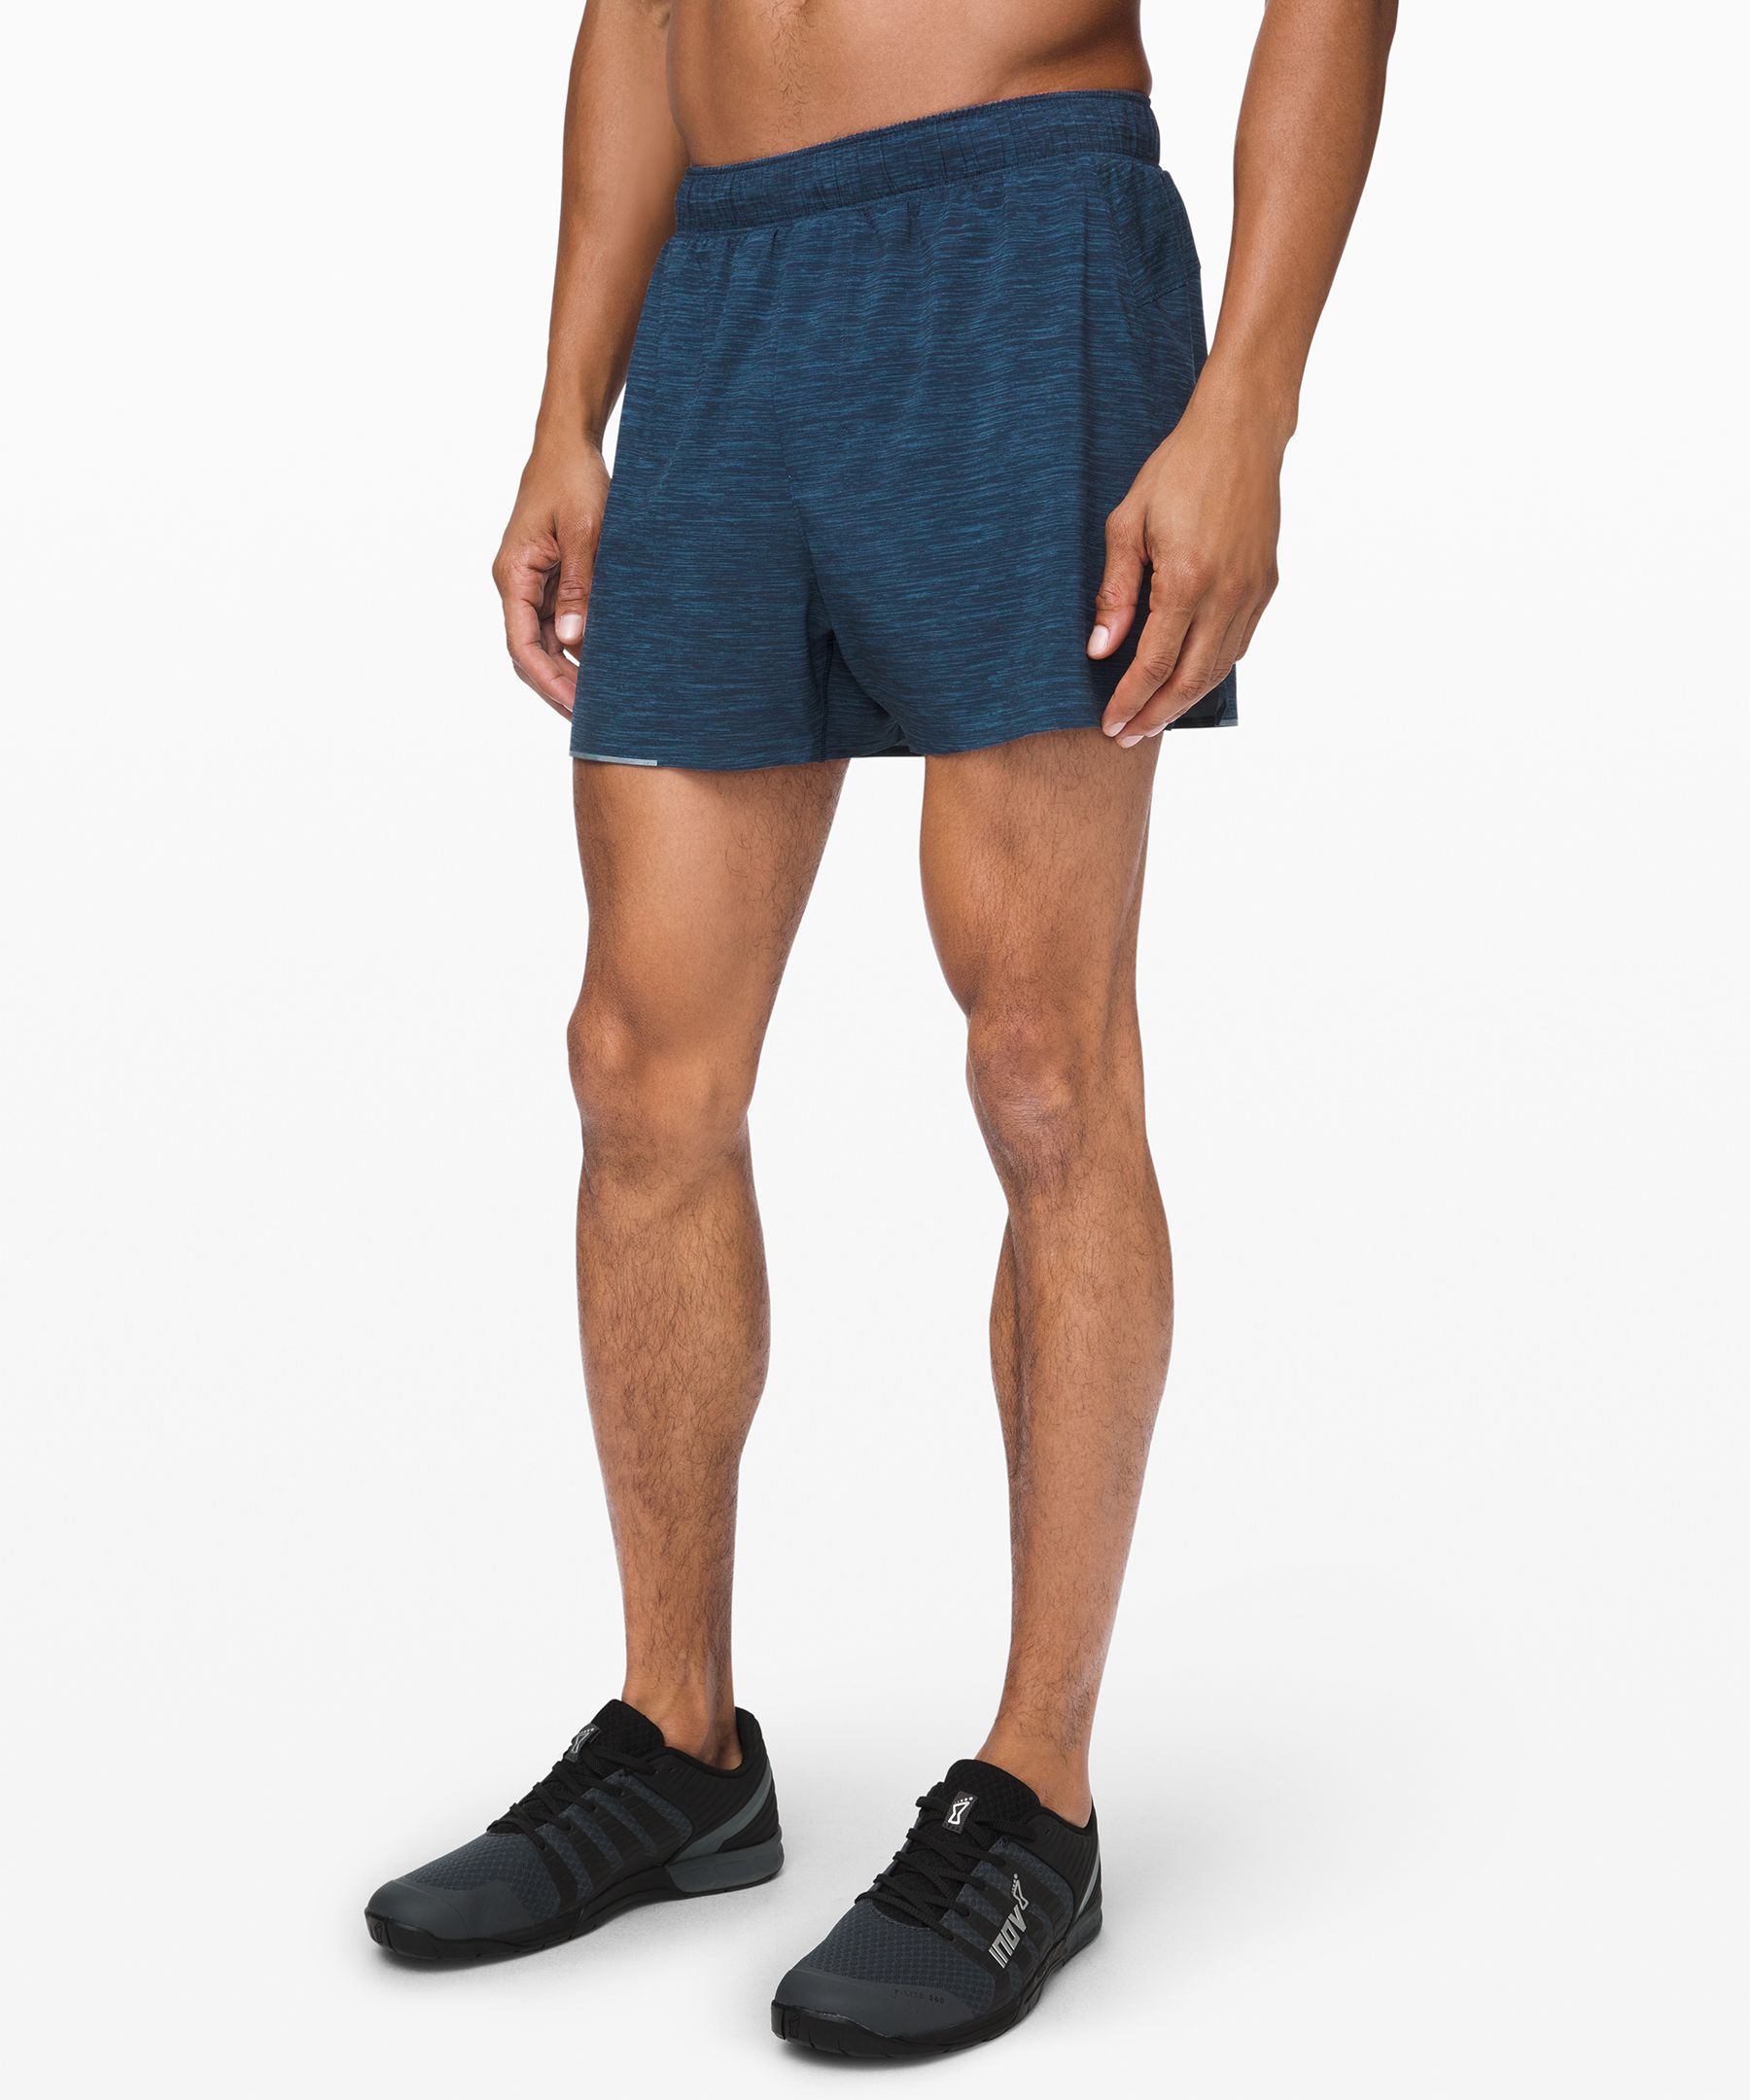 Lululemon Surge Lined Shorts 4 In Heather Allover Iron Blue True Navy